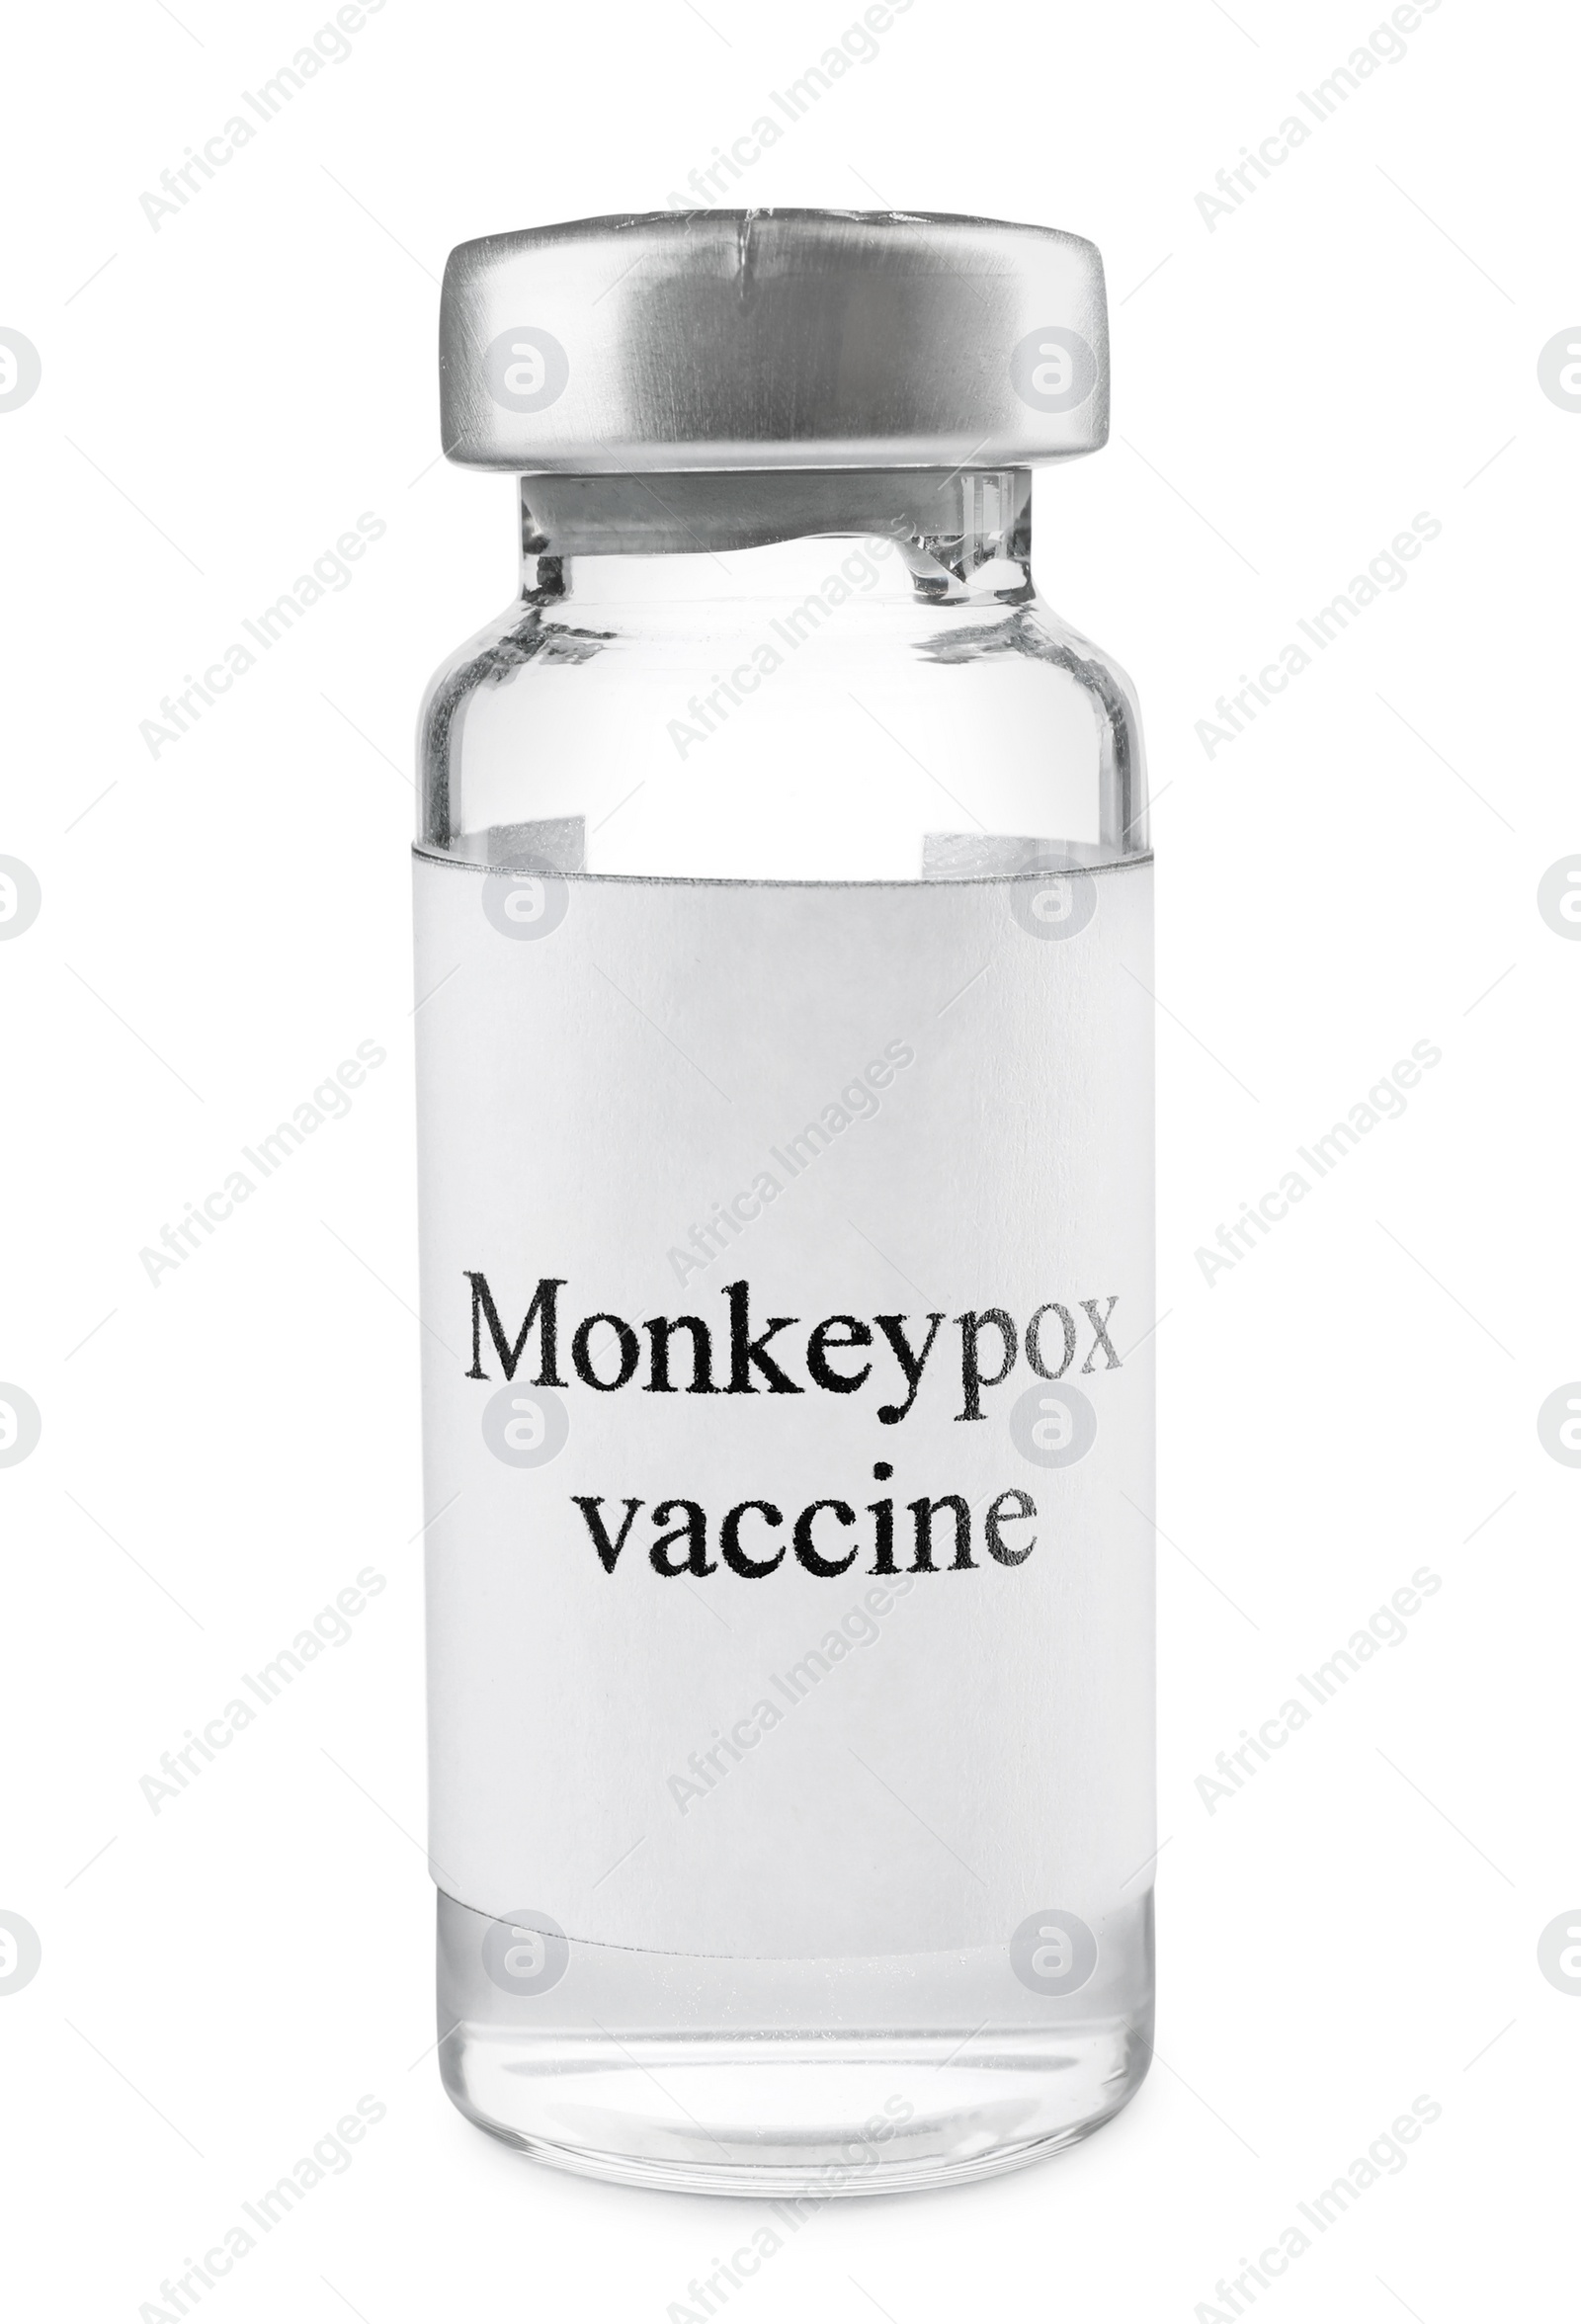 Photo of Monkeypox vaccine in glass vial isolated on white